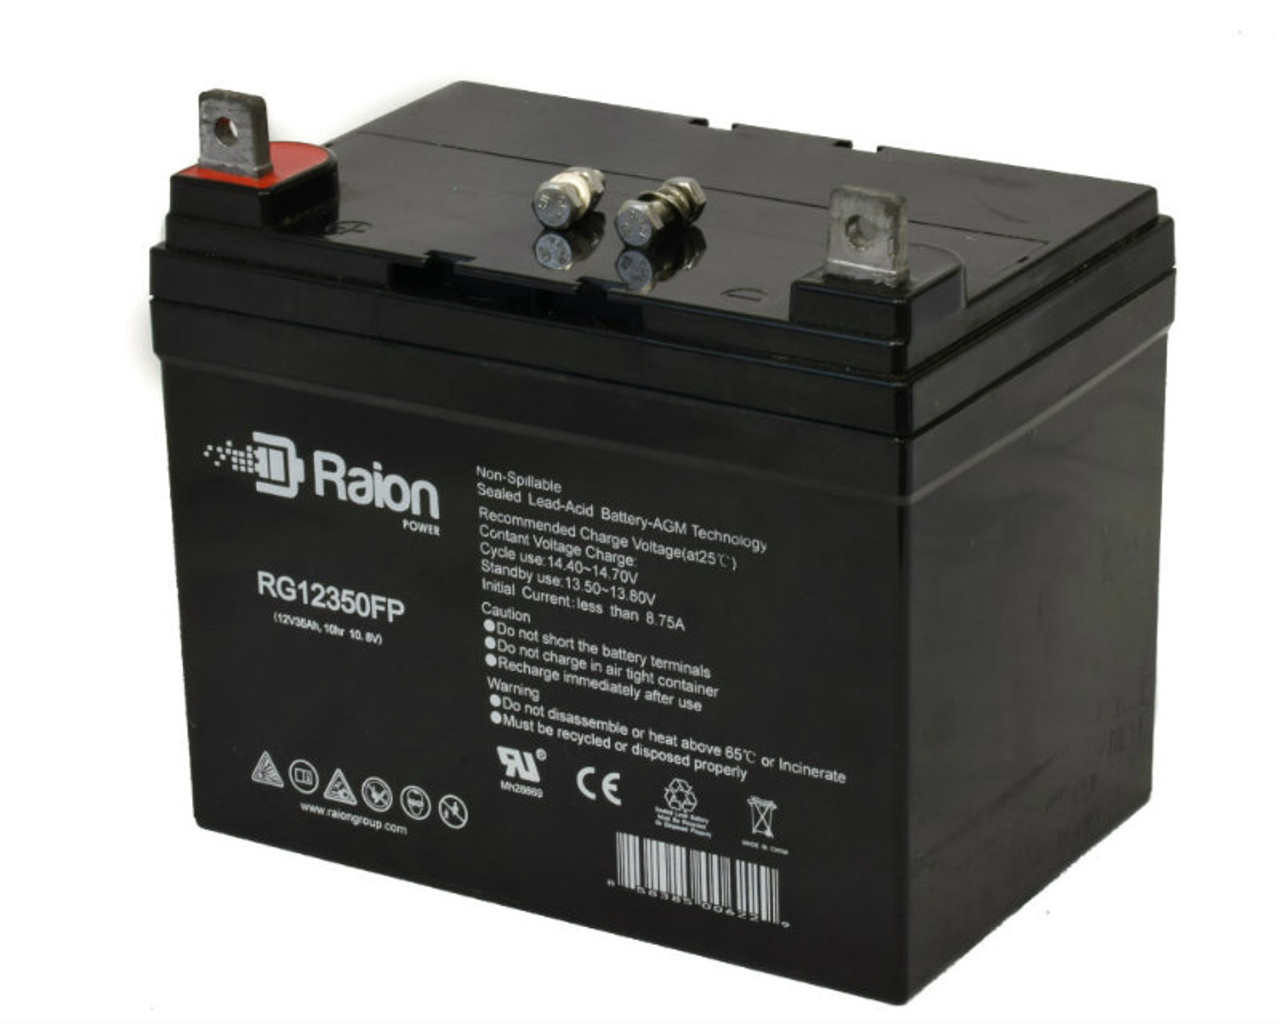 Raion Power Replacement 12V 35Ah Battery for Toro 16-44XHL - 1 Pack